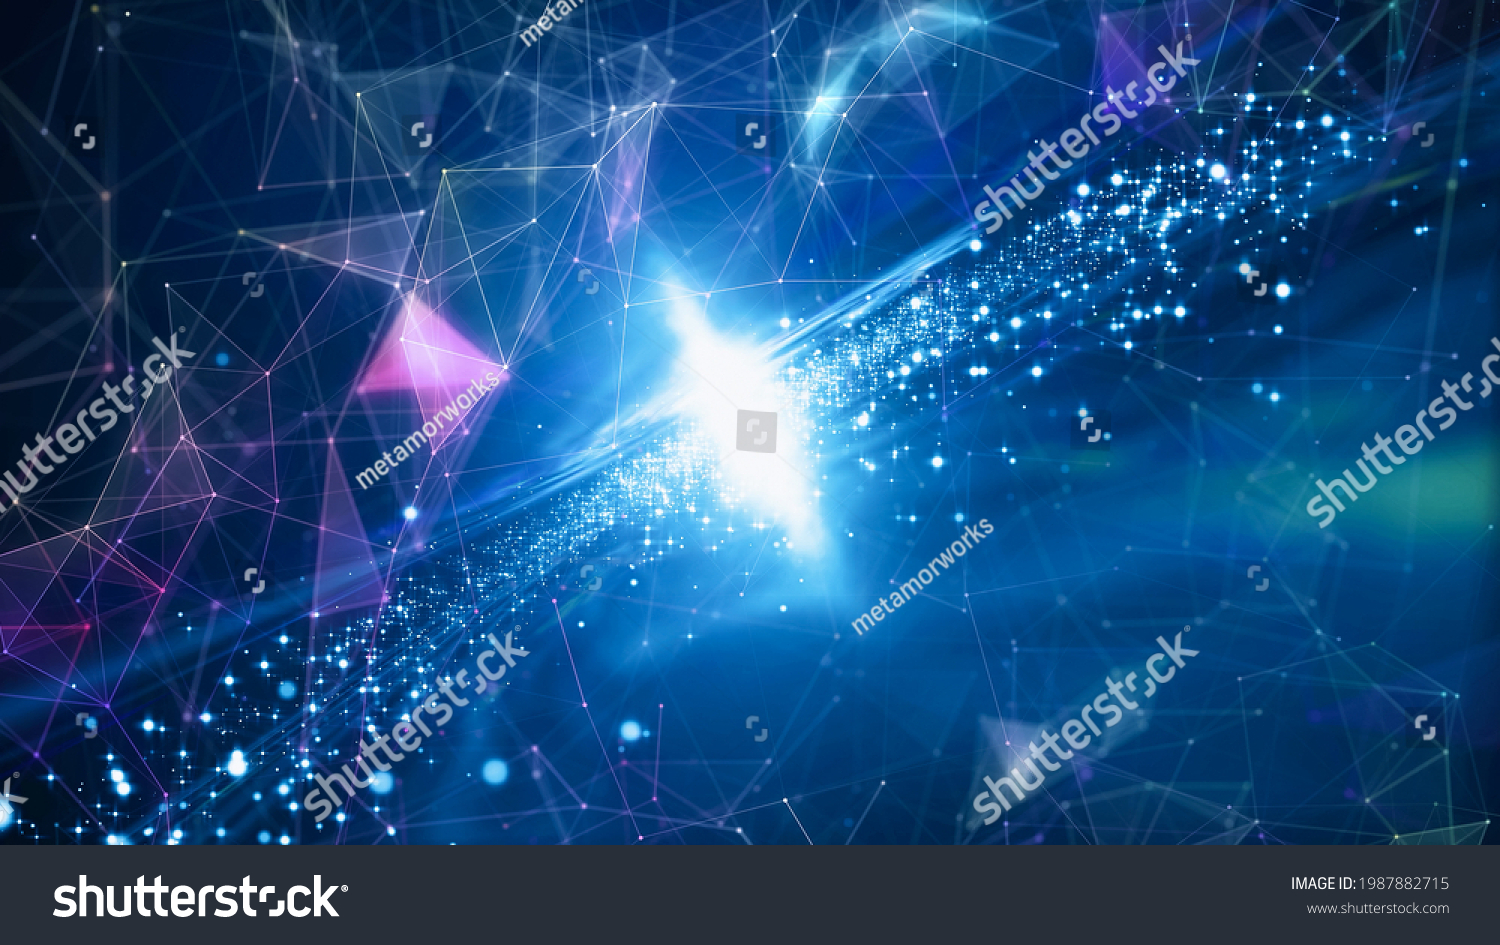 Communication network concept. Abstract background. #1987882715